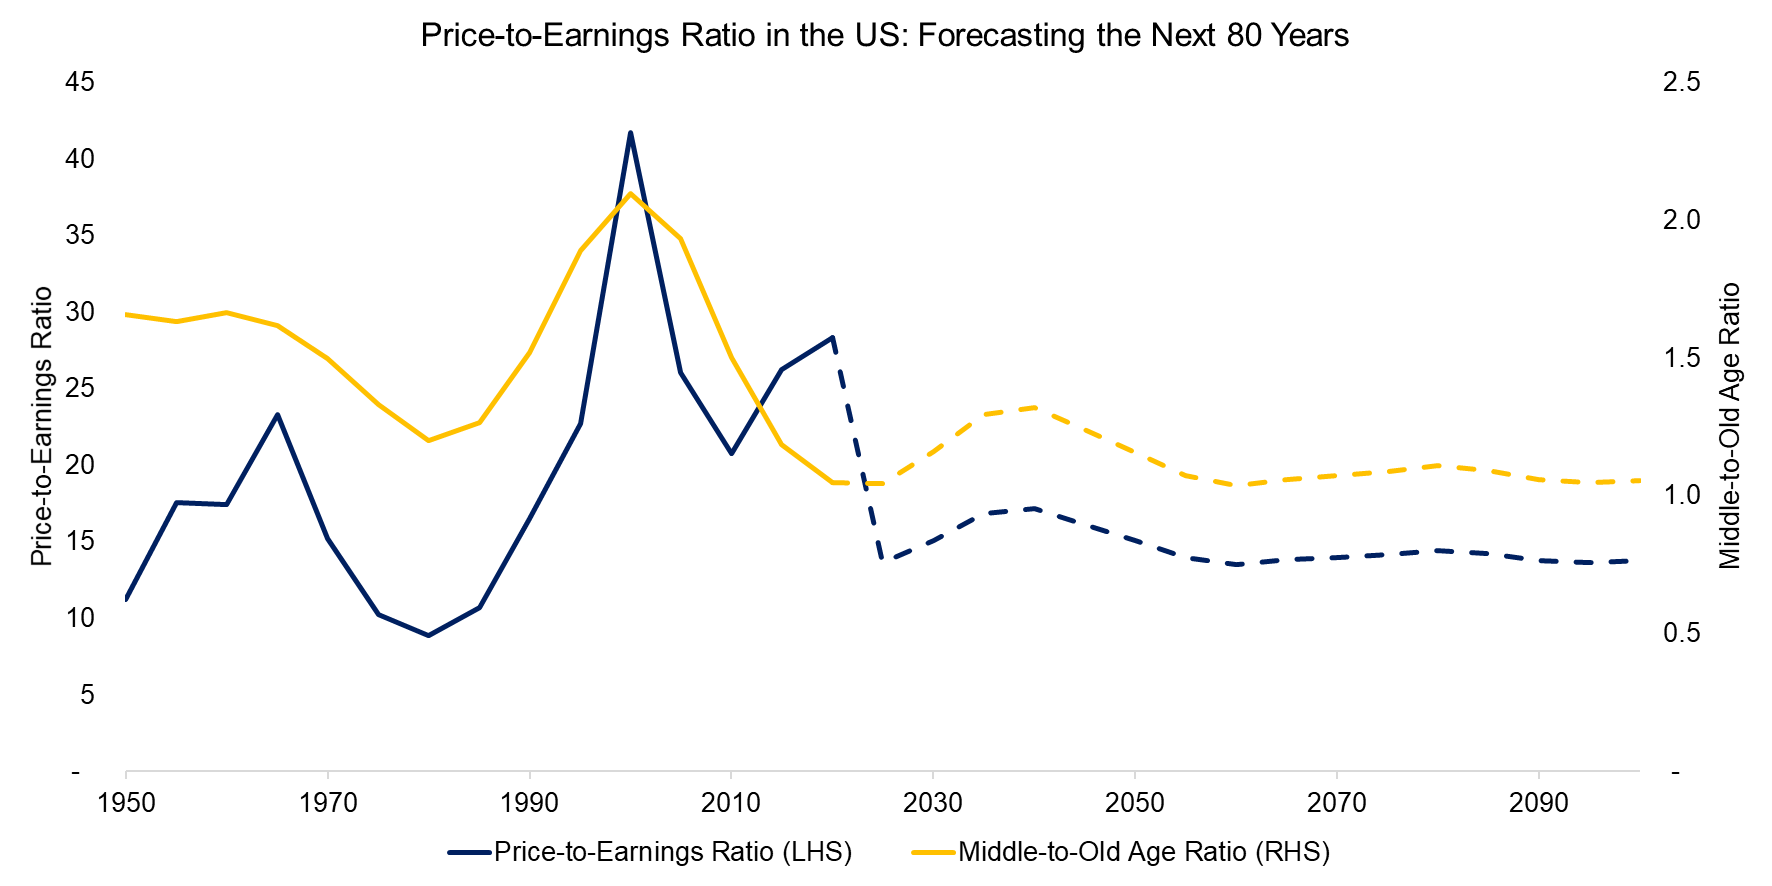 Price-to-Earnings Ratio in the US Forecasting the Next 80 Years